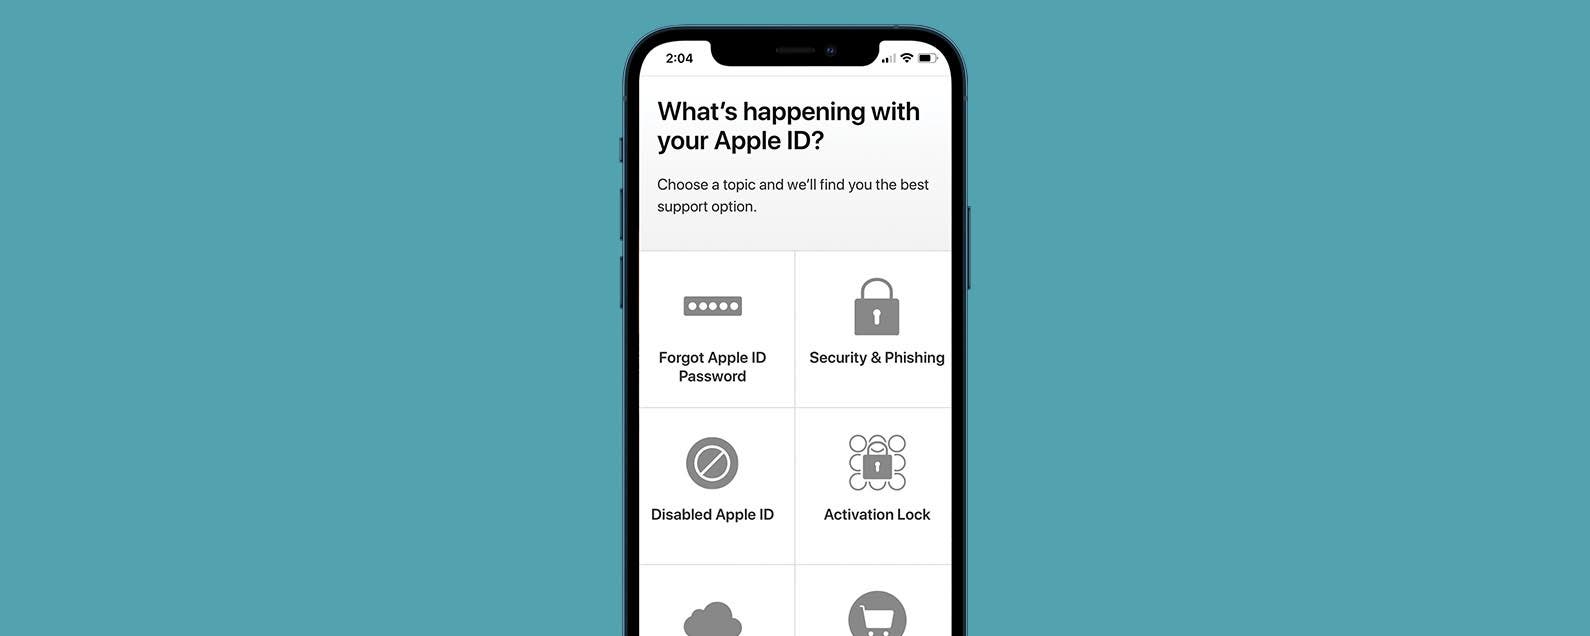 find apple id with a phone number